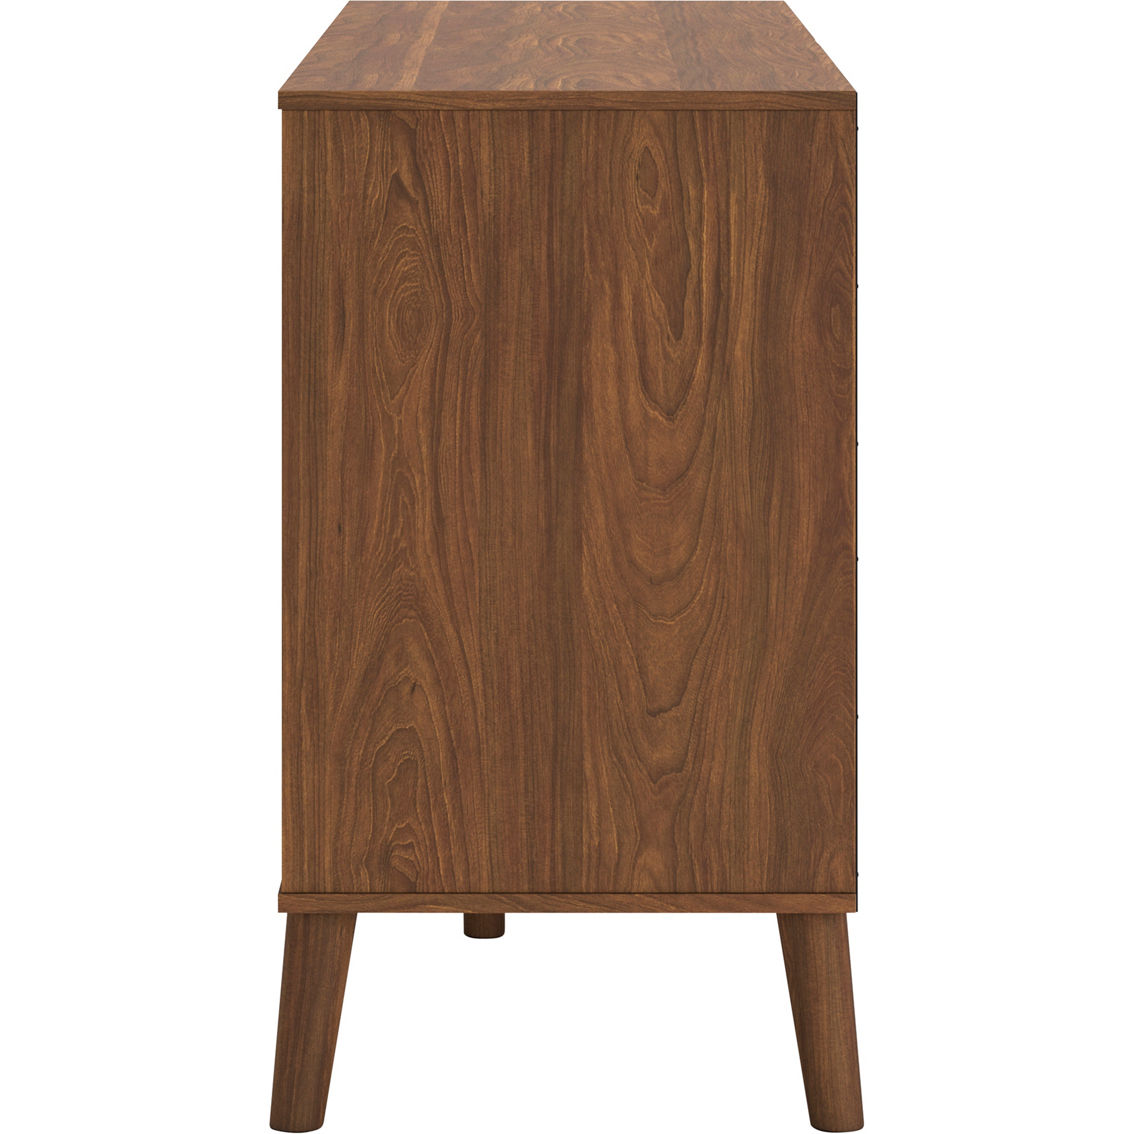 Signature Design by Ashley Fordmont Ready-to-Assemble Dresser - Image 3 of 8